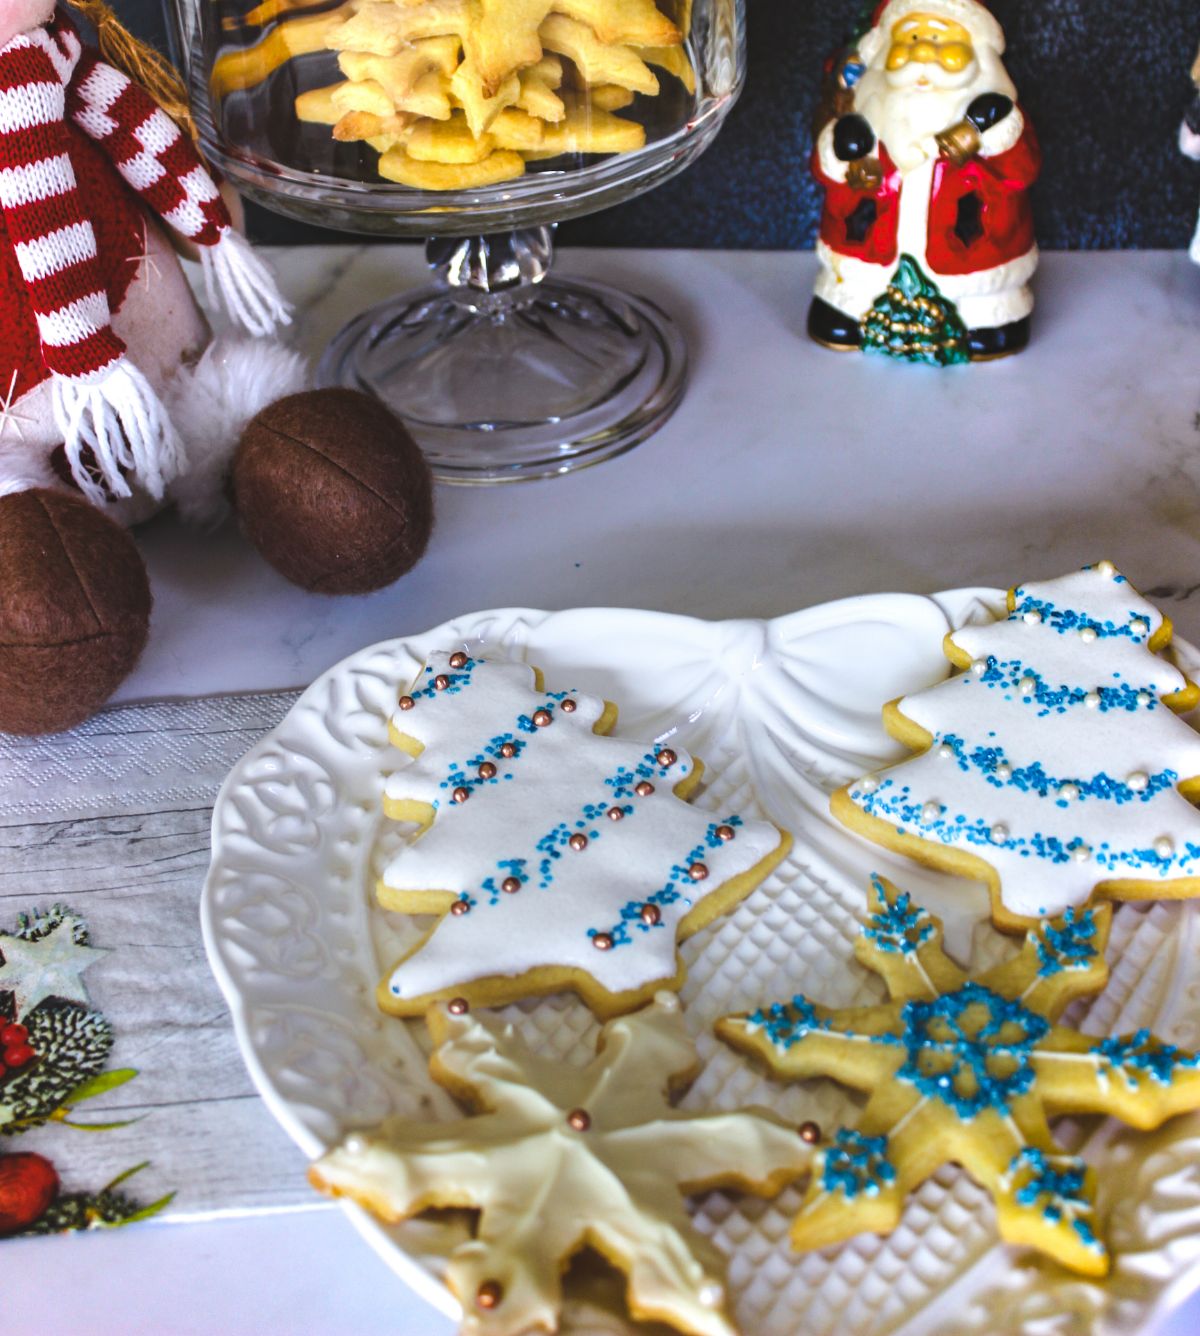 Christmas Sugar Cookies on a white serving plate on the bottom part of the image and the other bare cookies on the upper part of the image alongside with a Santa Claus miniature and stuffed toy.